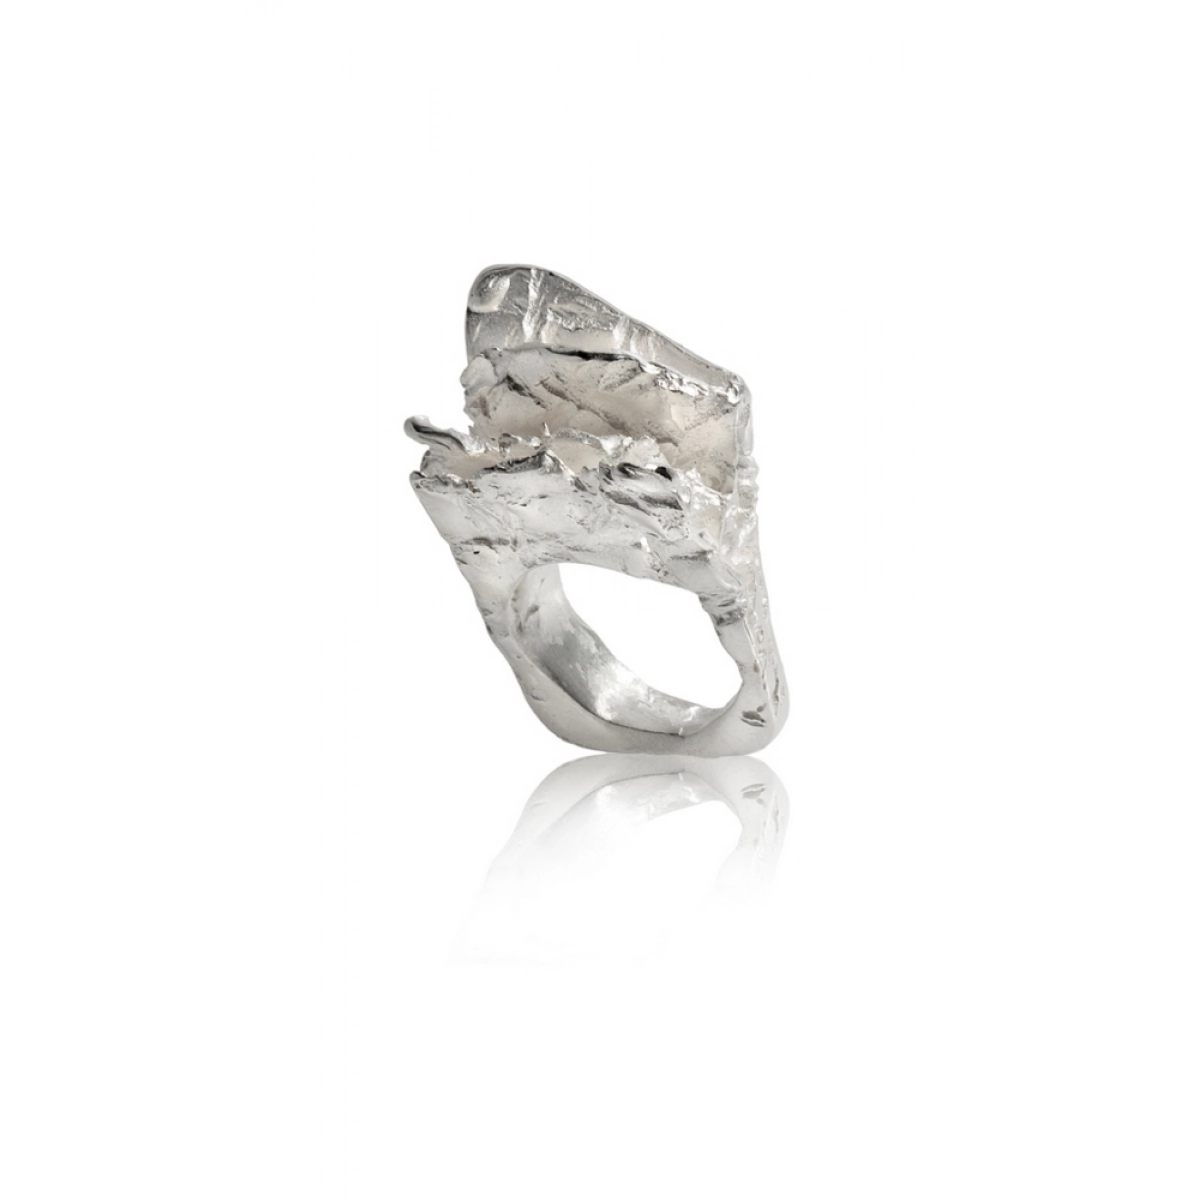 The burlap collection silver ring. Measurement contour ring No. 10 FP A49 - P Fili Plaza FP A49-P